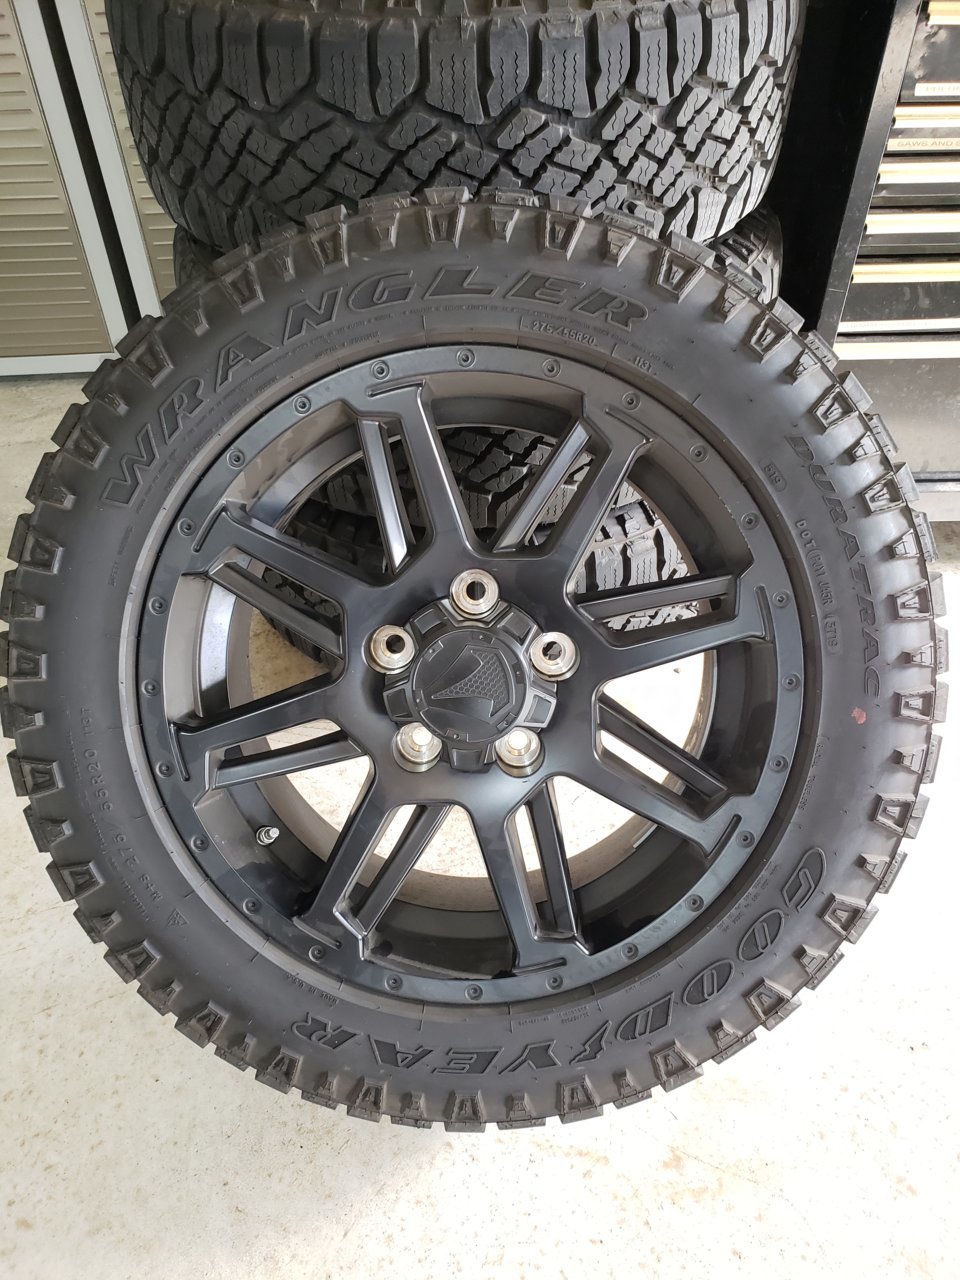 SOLD. 2020 Tundra Takeoffs-Goodyear Tires 275/55R20 and Wheels - $1100 |  Toyota Tundra Forum